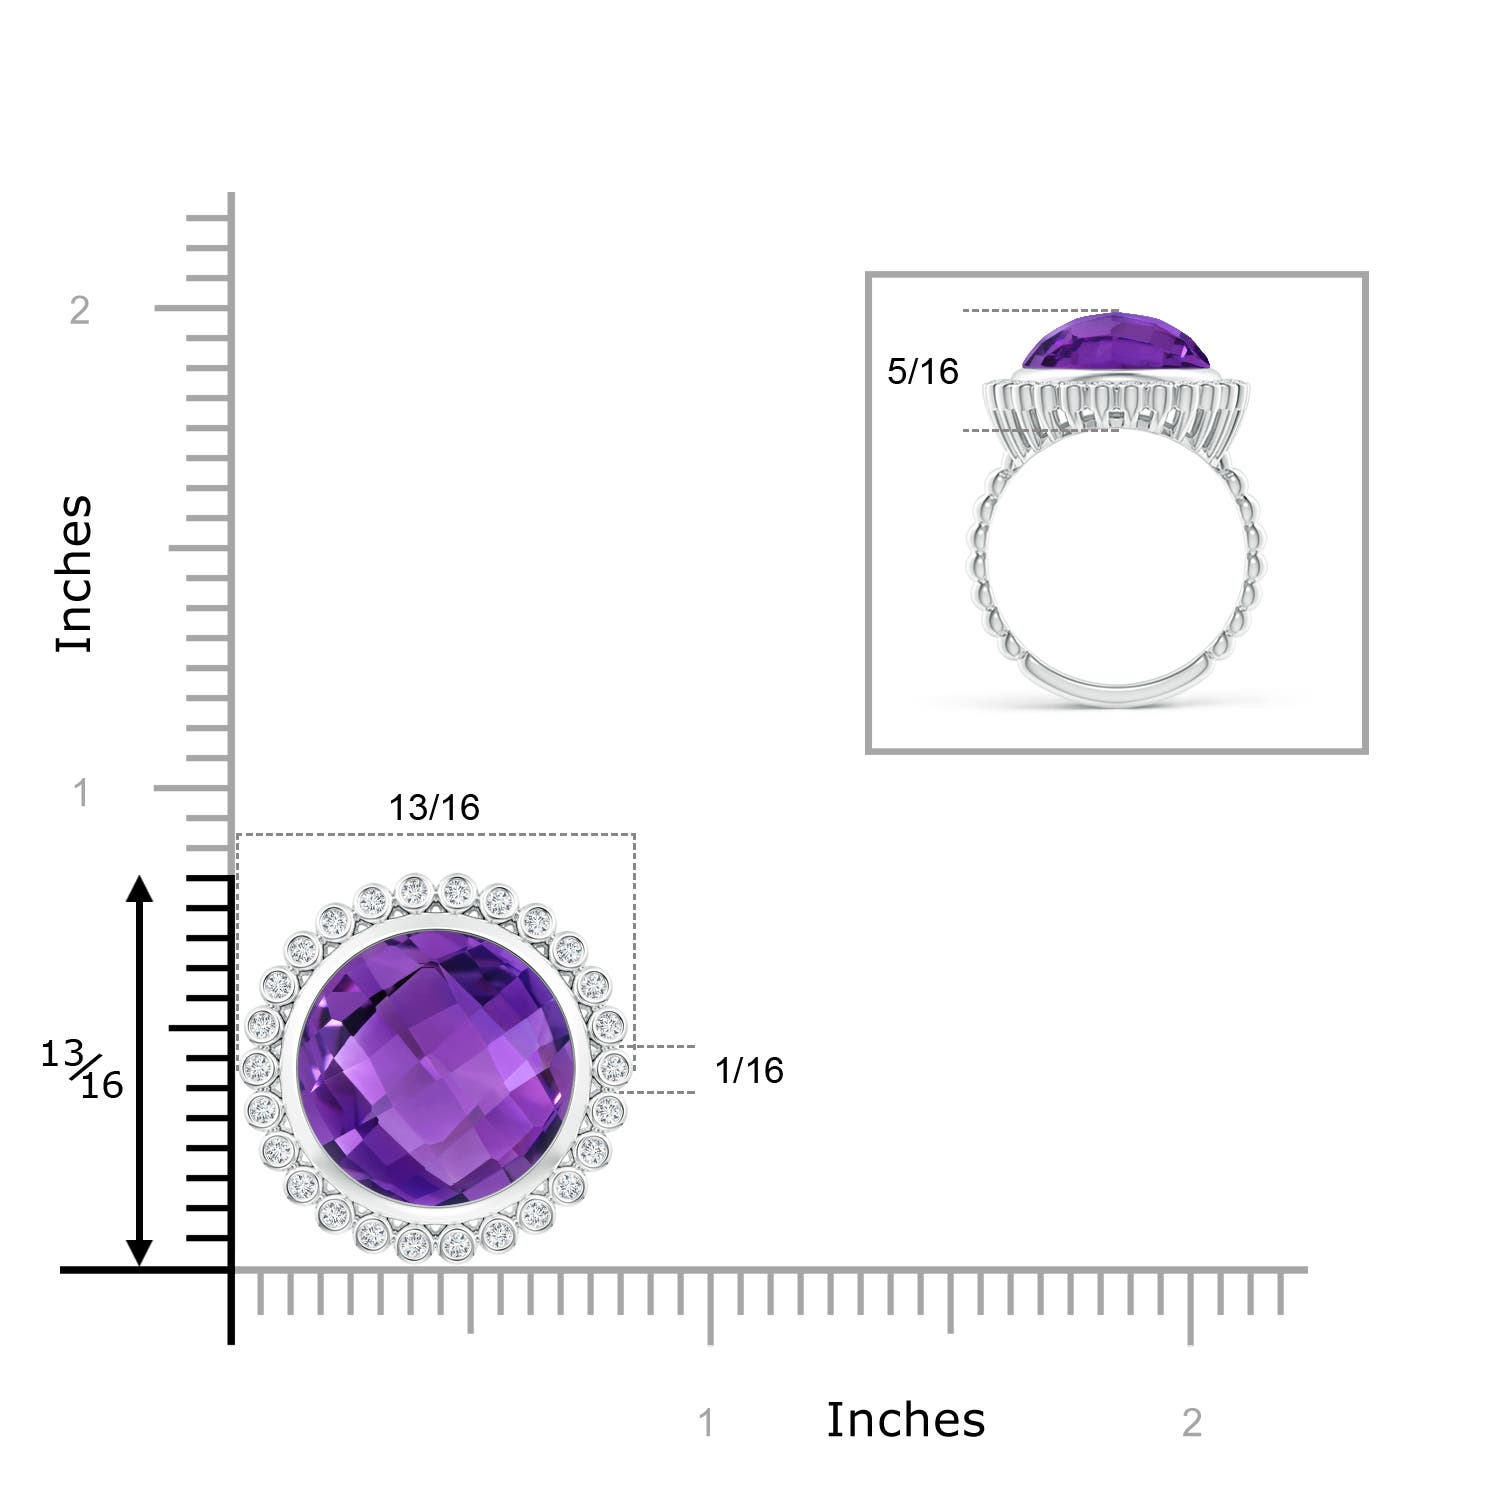 AAA - Amethyst / 8.16 CT / 14 KT White Gold